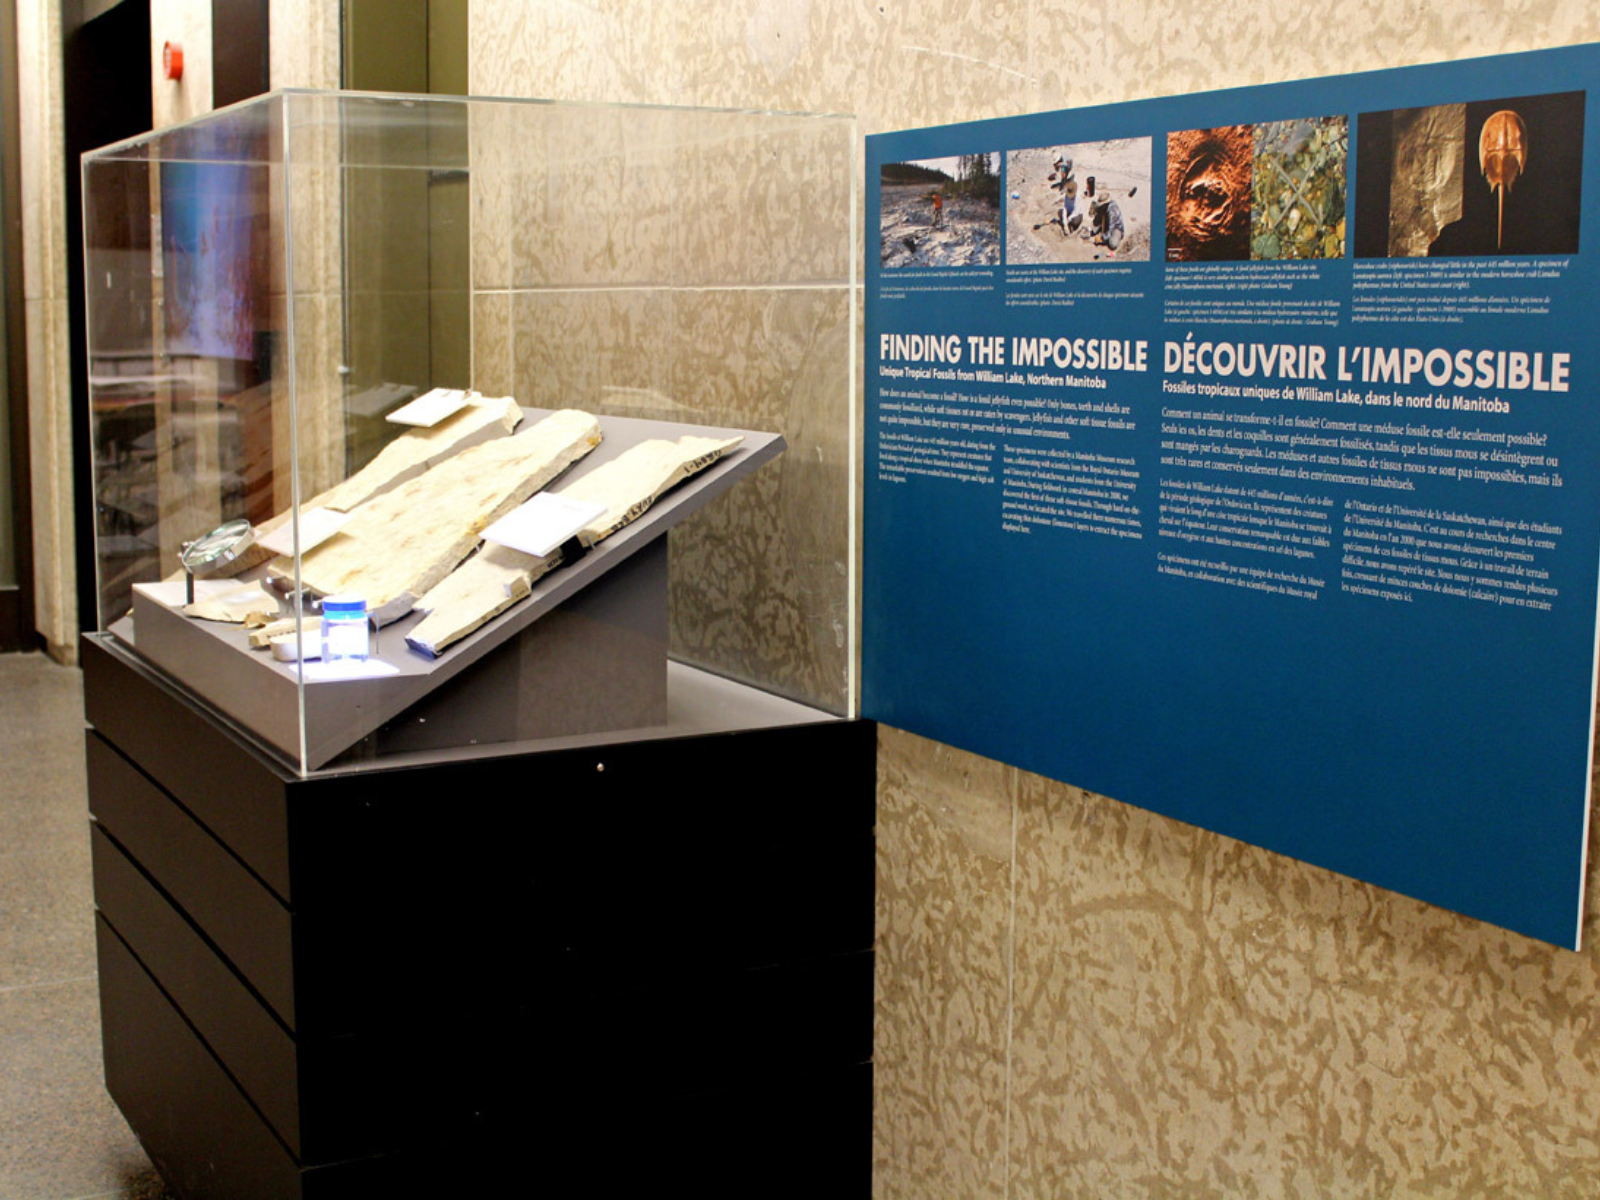 A Museum display case from the side, with the contents obscured by the angle. A label panel is on the wall next to the case.